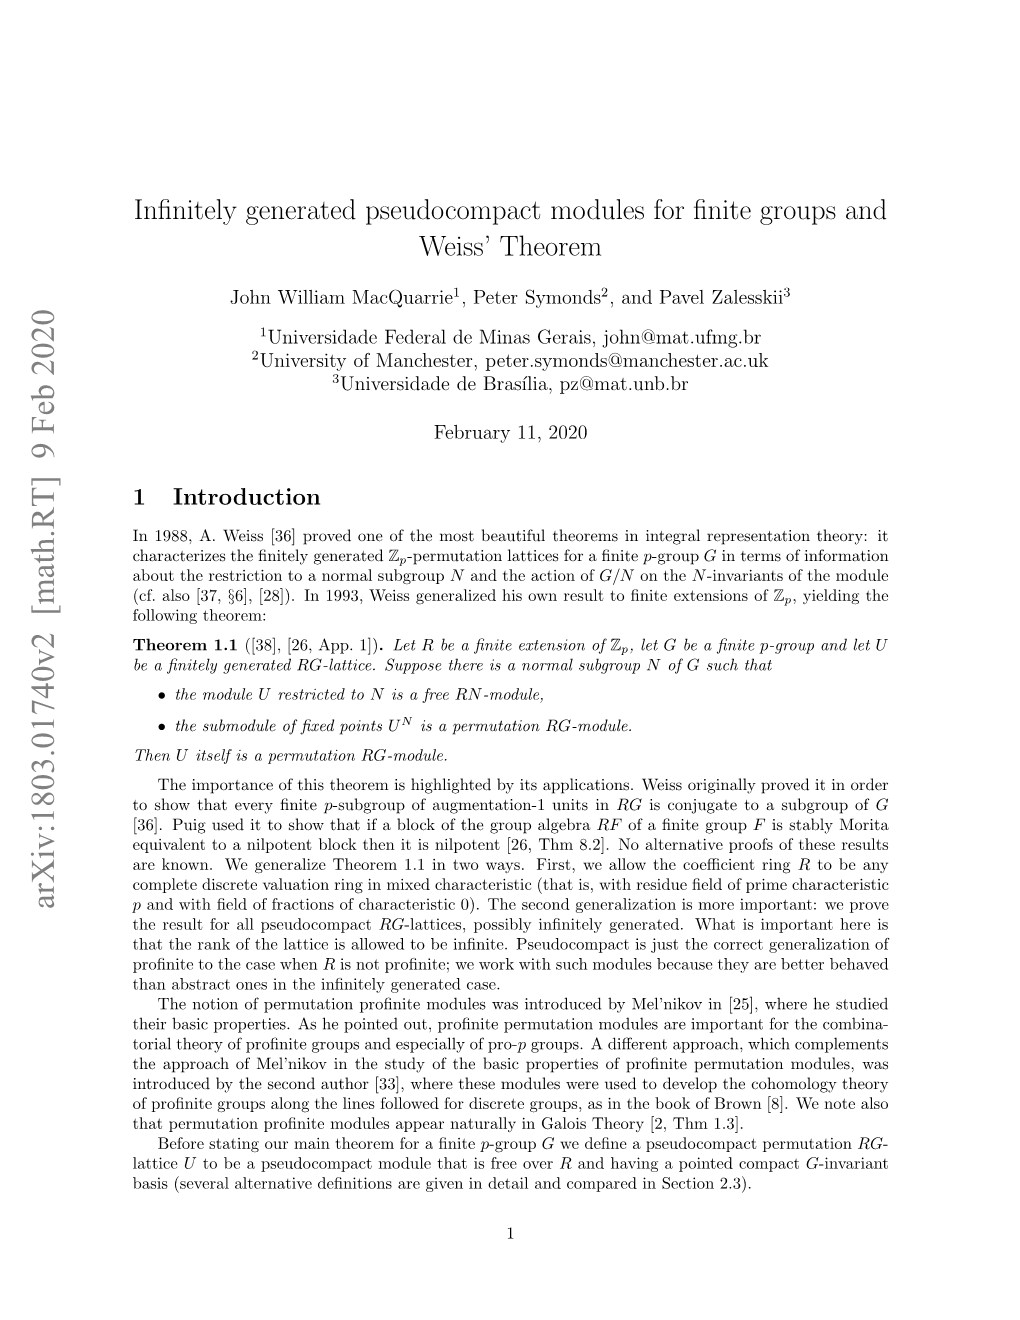 Infinitely Generated Pseudocompact Modules for Finite Groups and Weiss